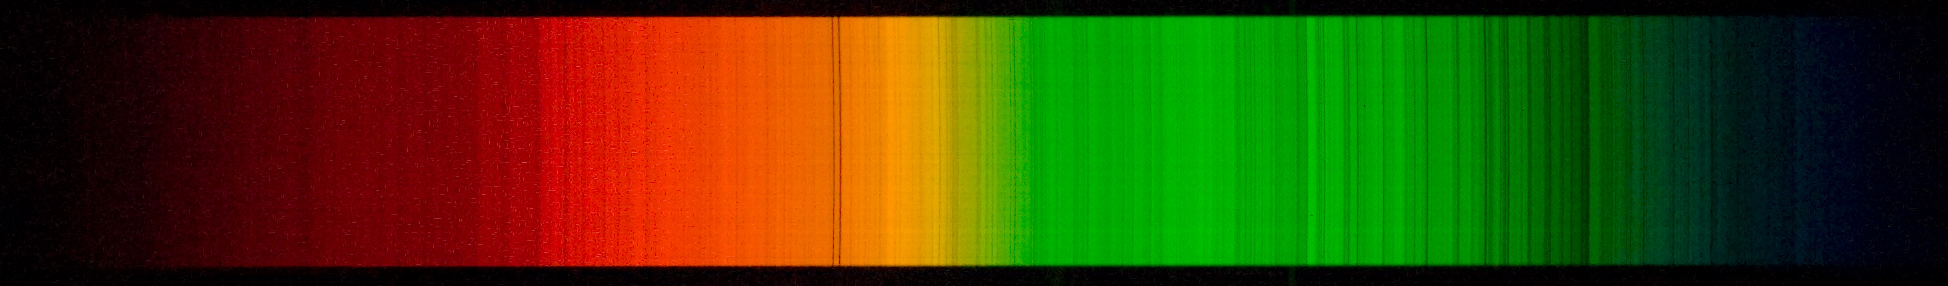 Betelgeuse spectrum, first night out wiht the astronomical spectrograph with 1200 lines/mm